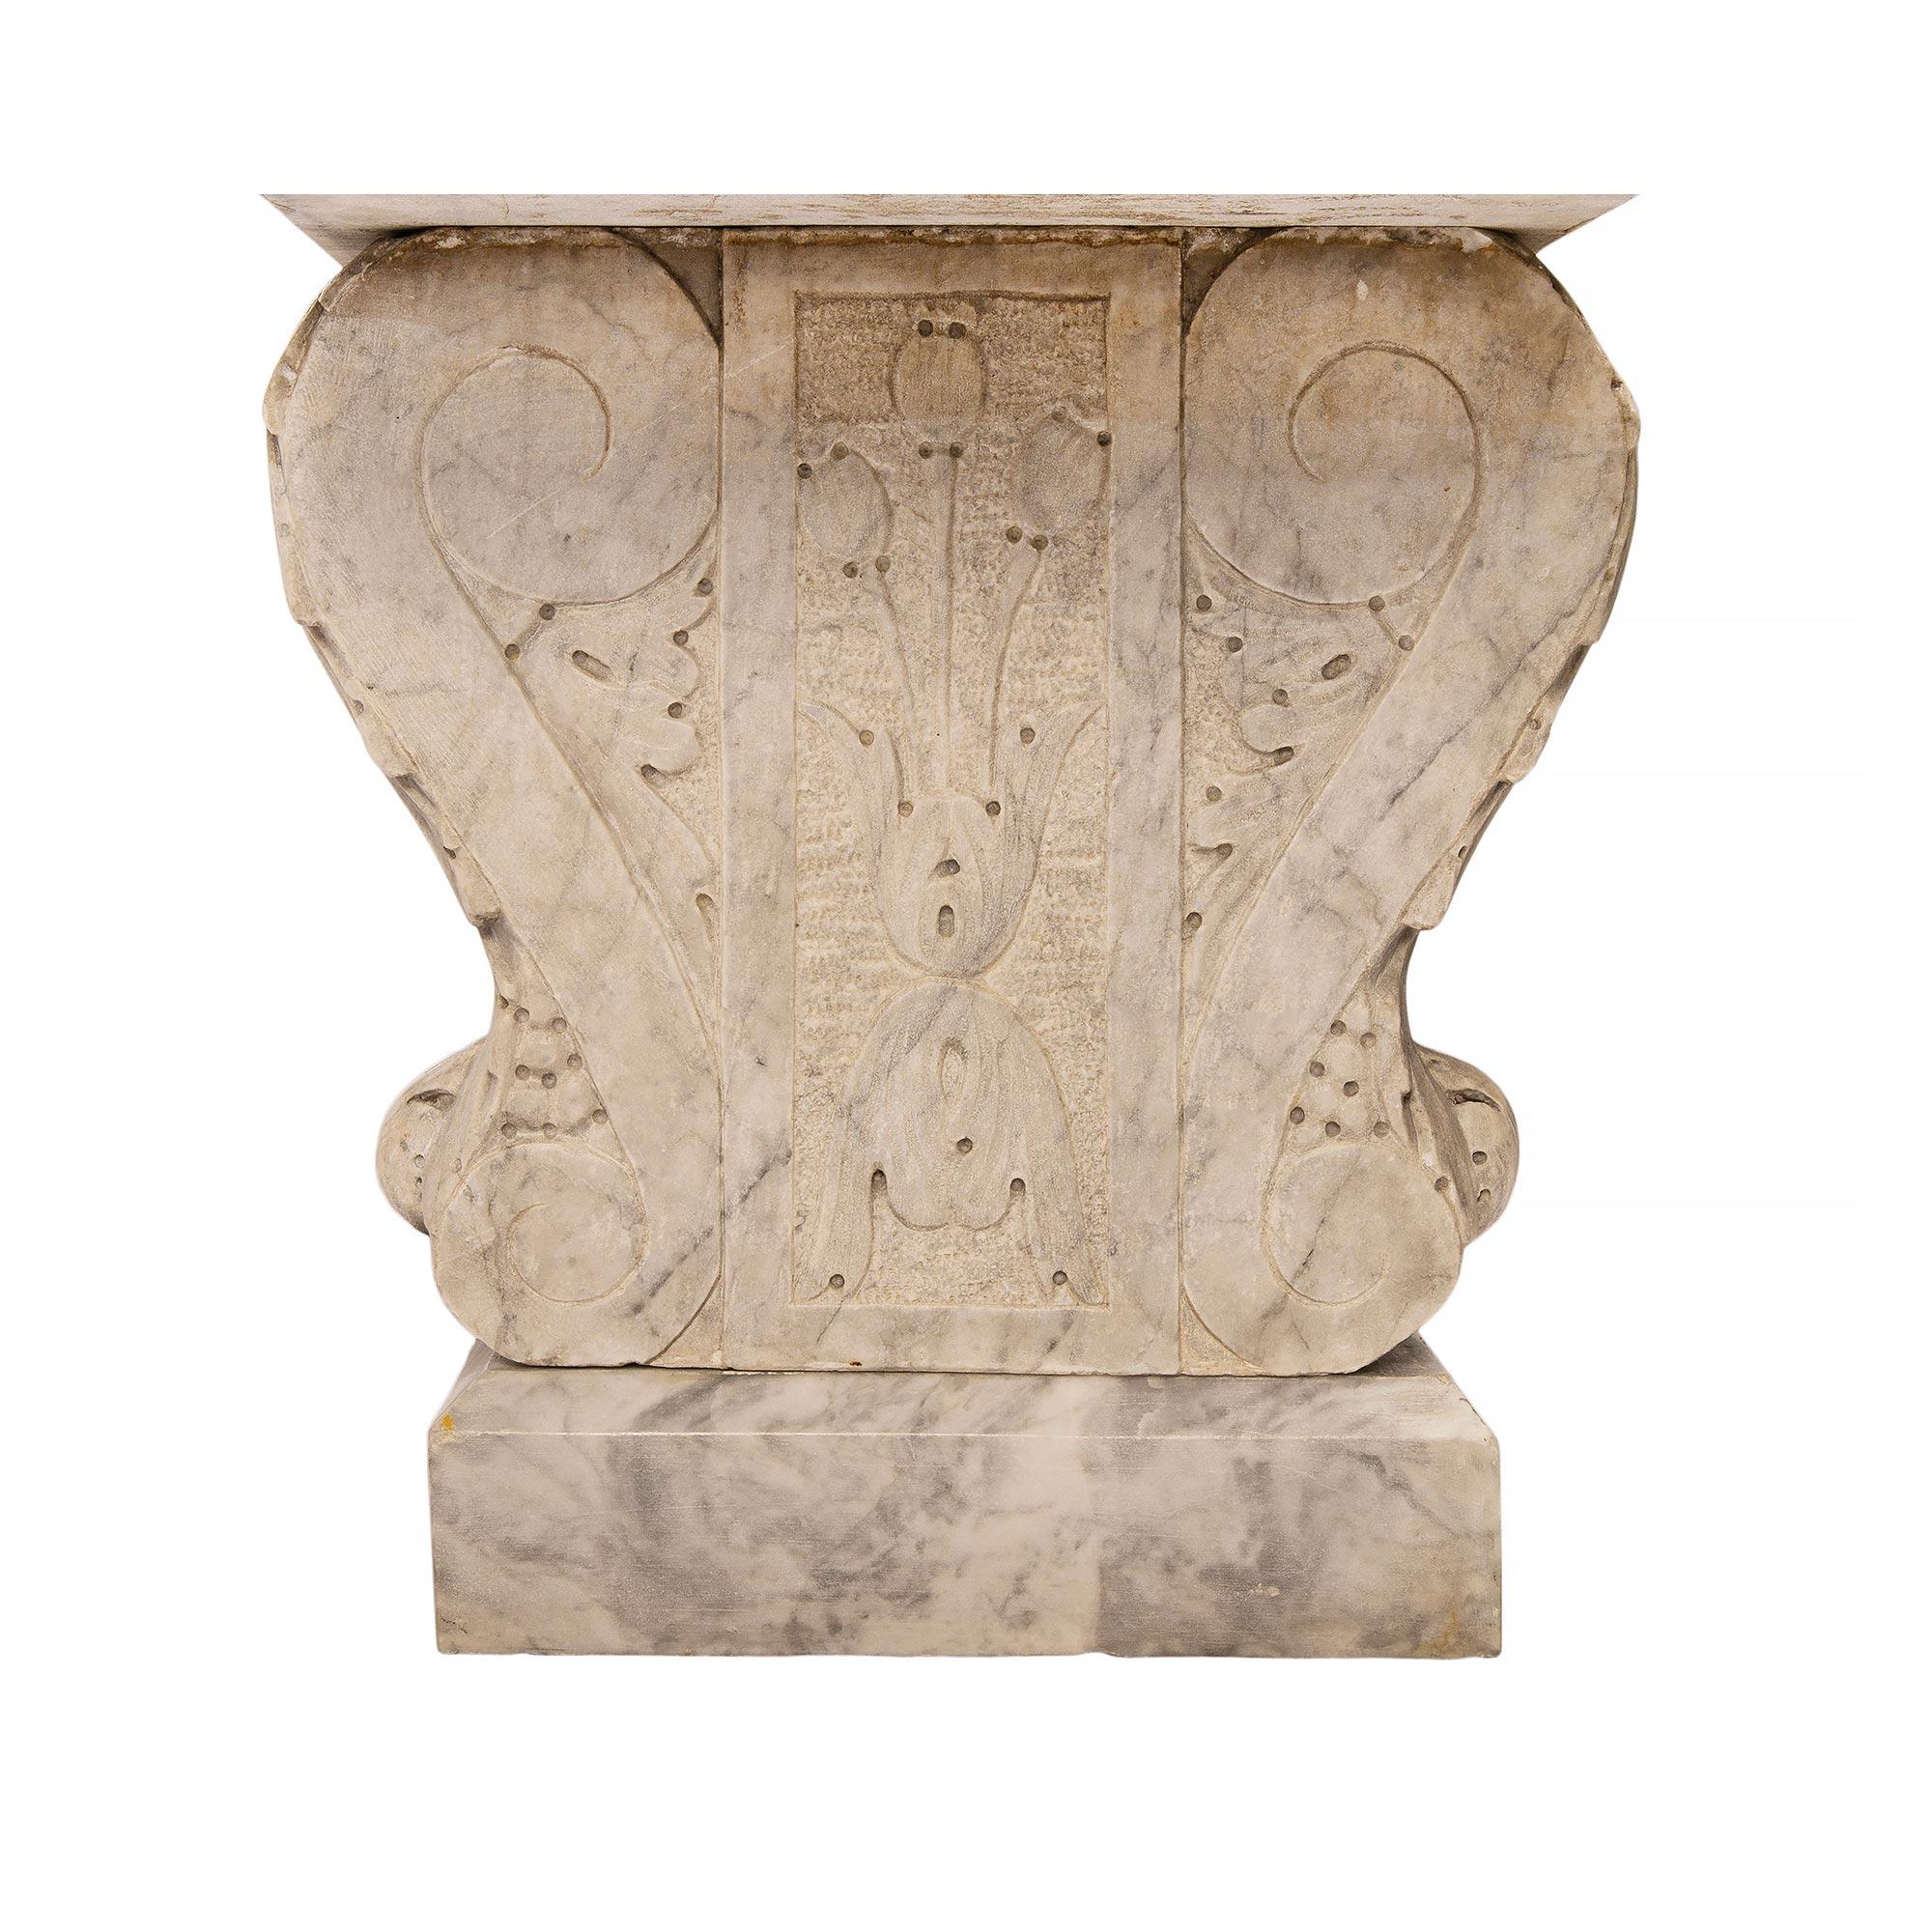 An attractive Italian 19th century Louis XV st. white Carrara marble garden bench. The bench is raised by supports above rectangular cut angled blocks. The carved supports have a scrolled design with finely carved outer acanthus leaves. The